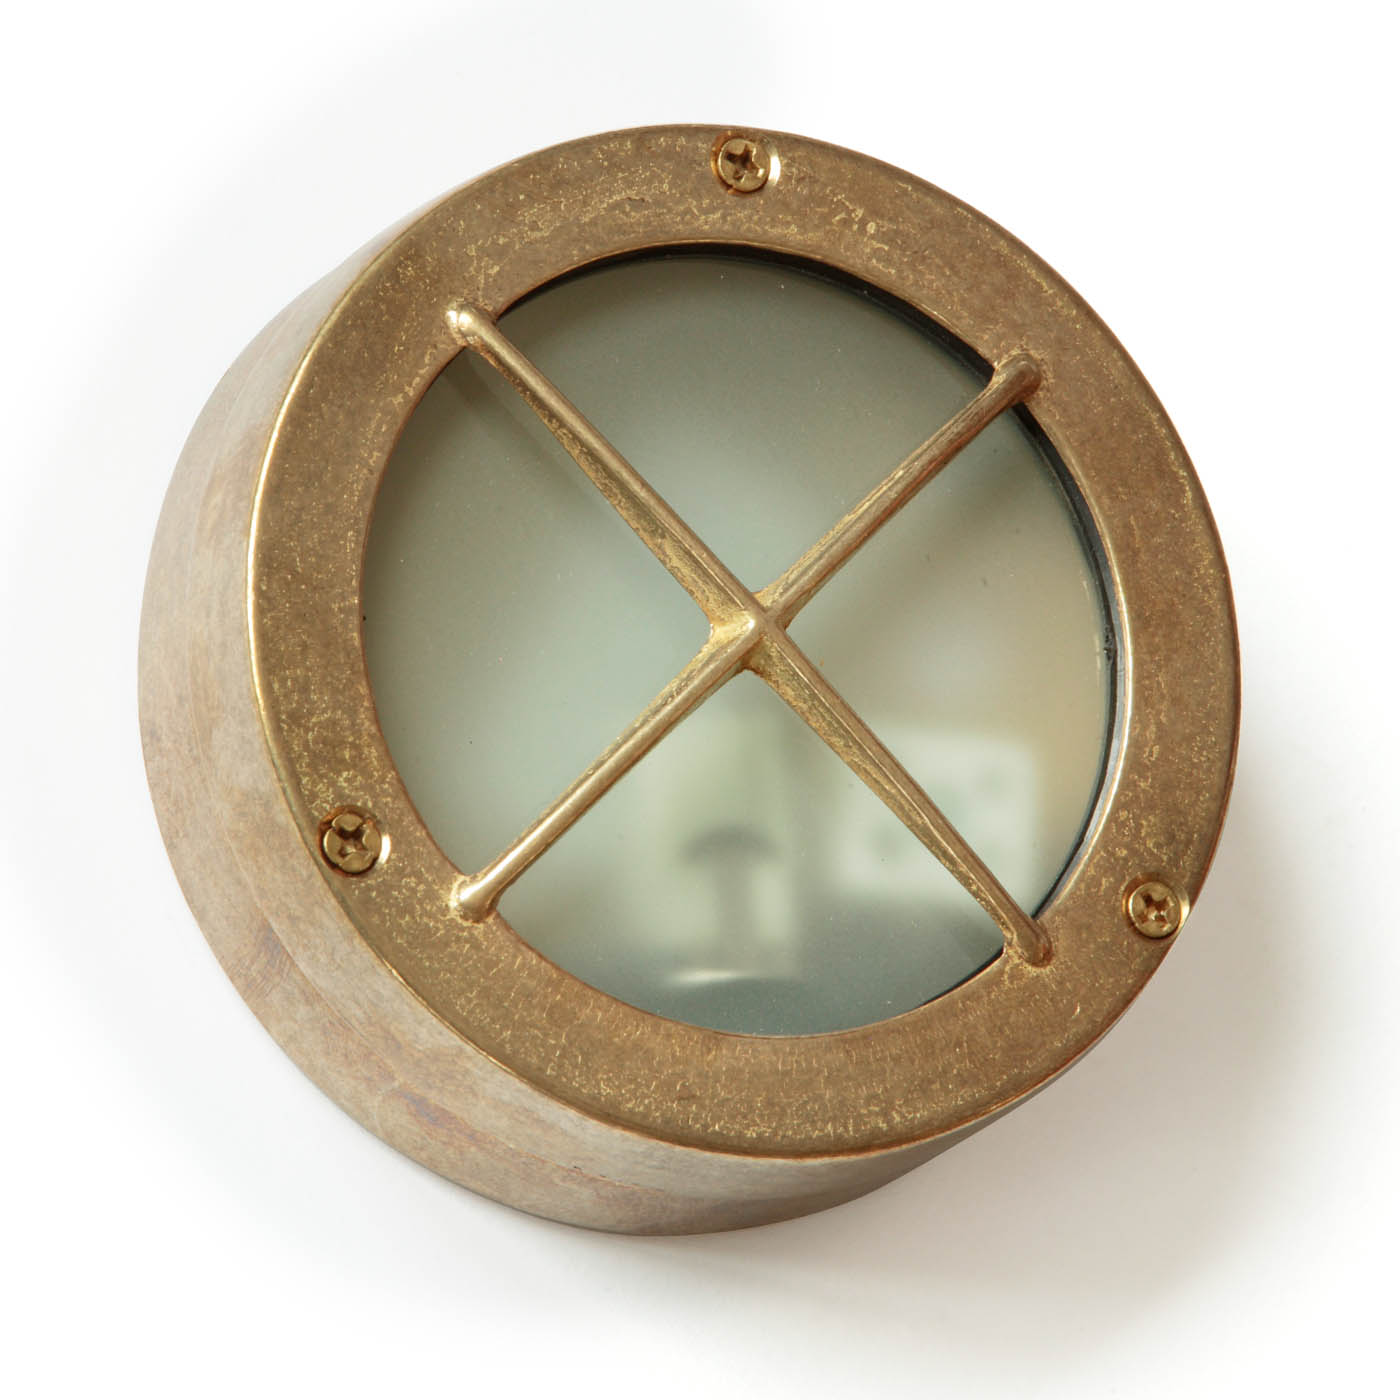 Small gridded cabin wall light made of brass